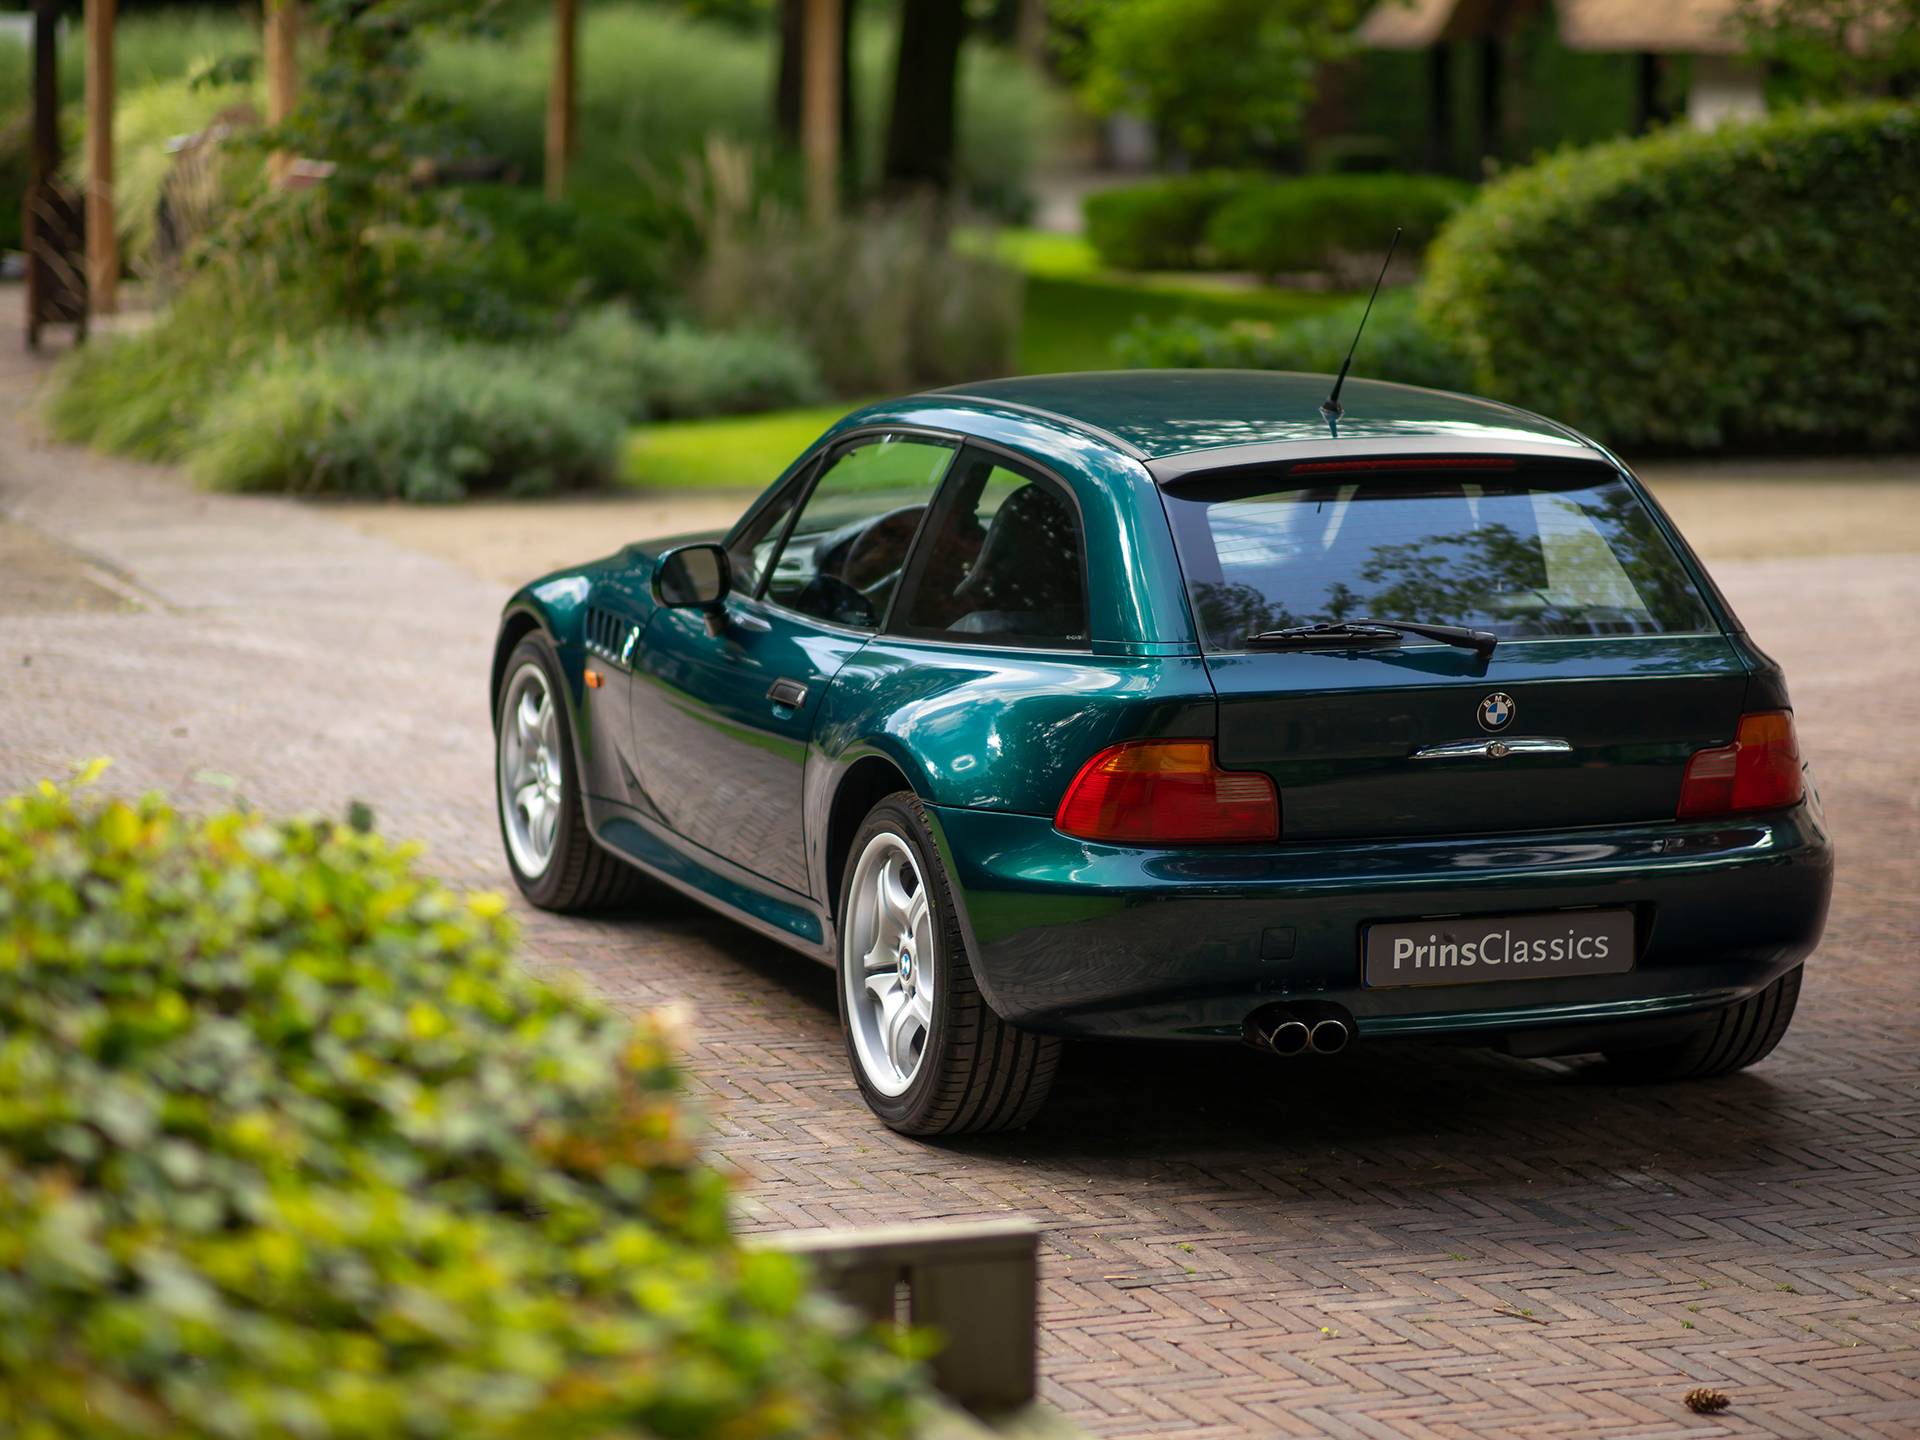 For Sale BMW Z3 Coupé 2.8 (1999) offered for AUD 33,687